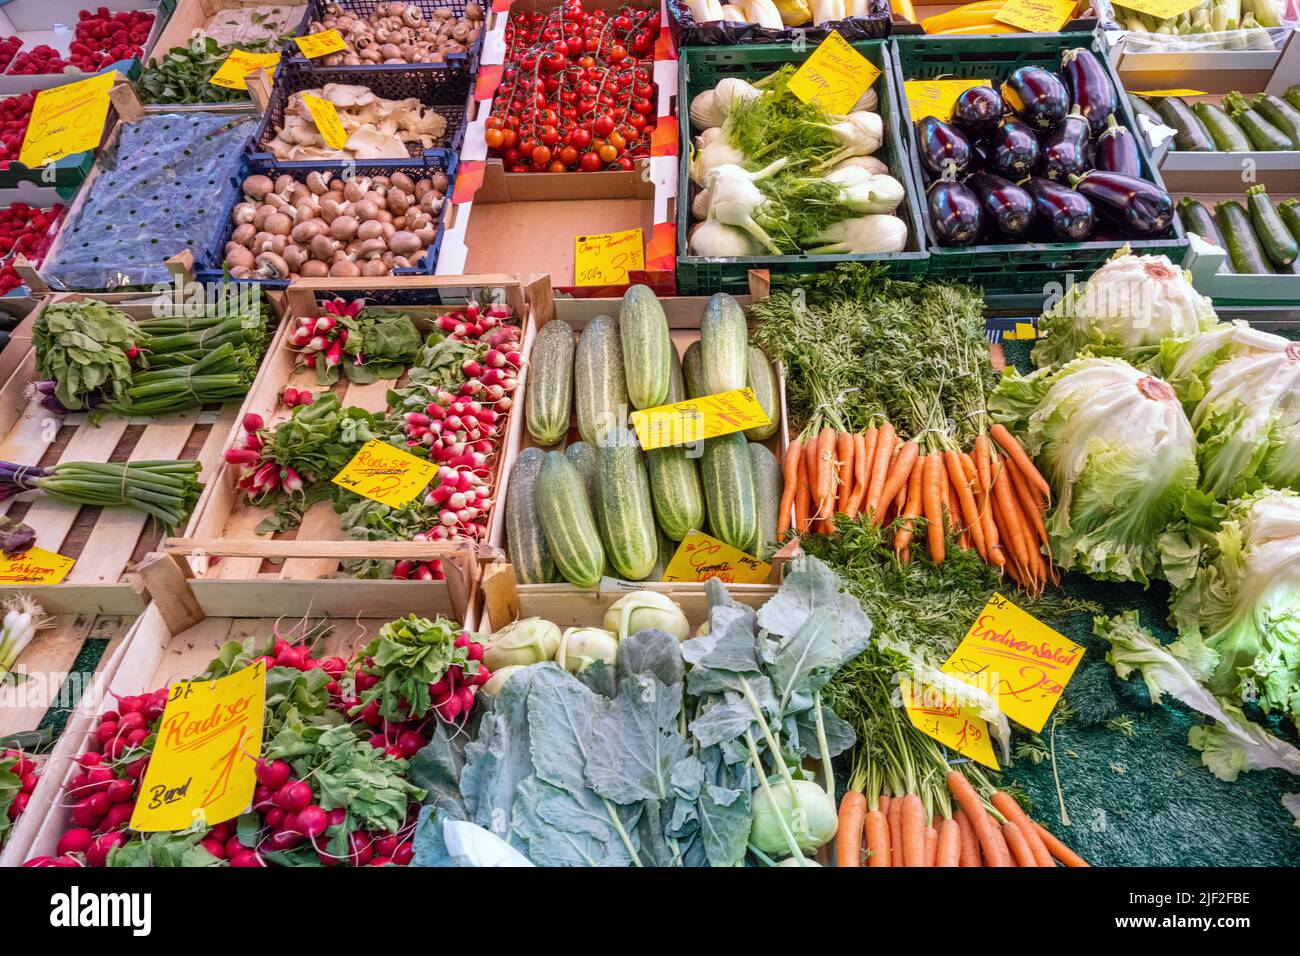 Great choice of vegetables and salad at a market stall Stock Photo